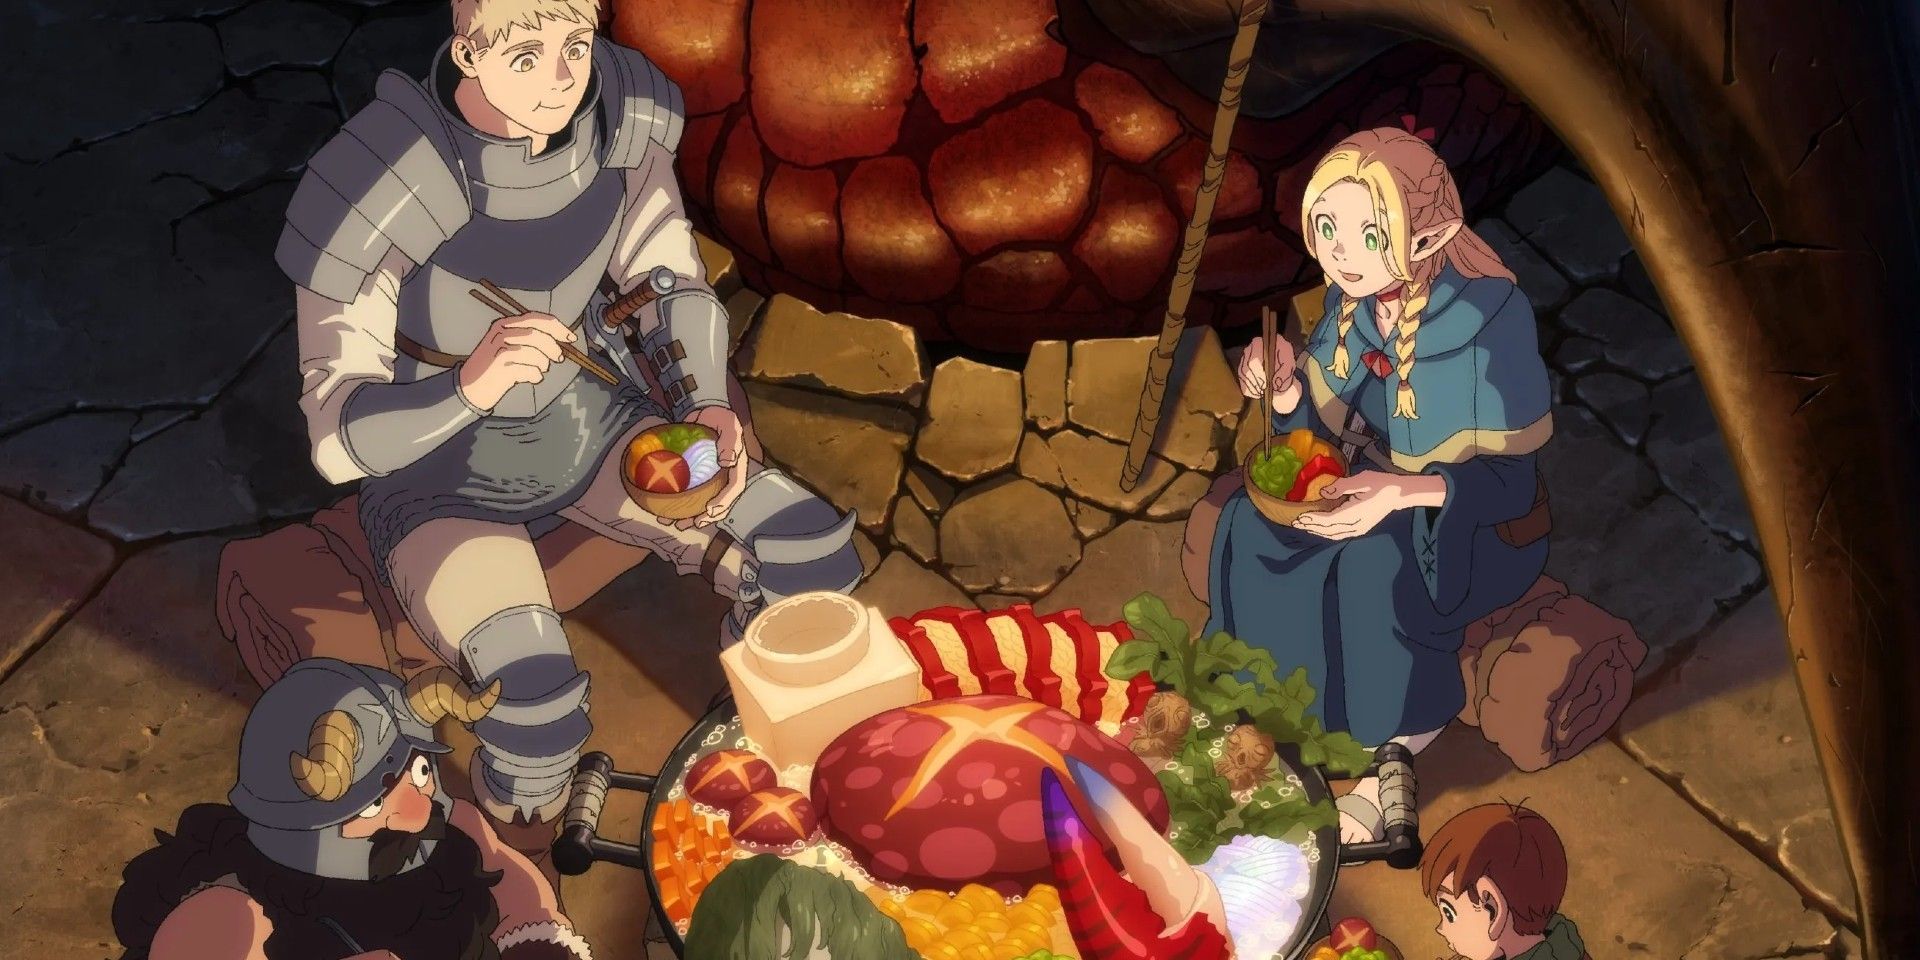 Delicious In Dungeon A Dungeon Dinner 